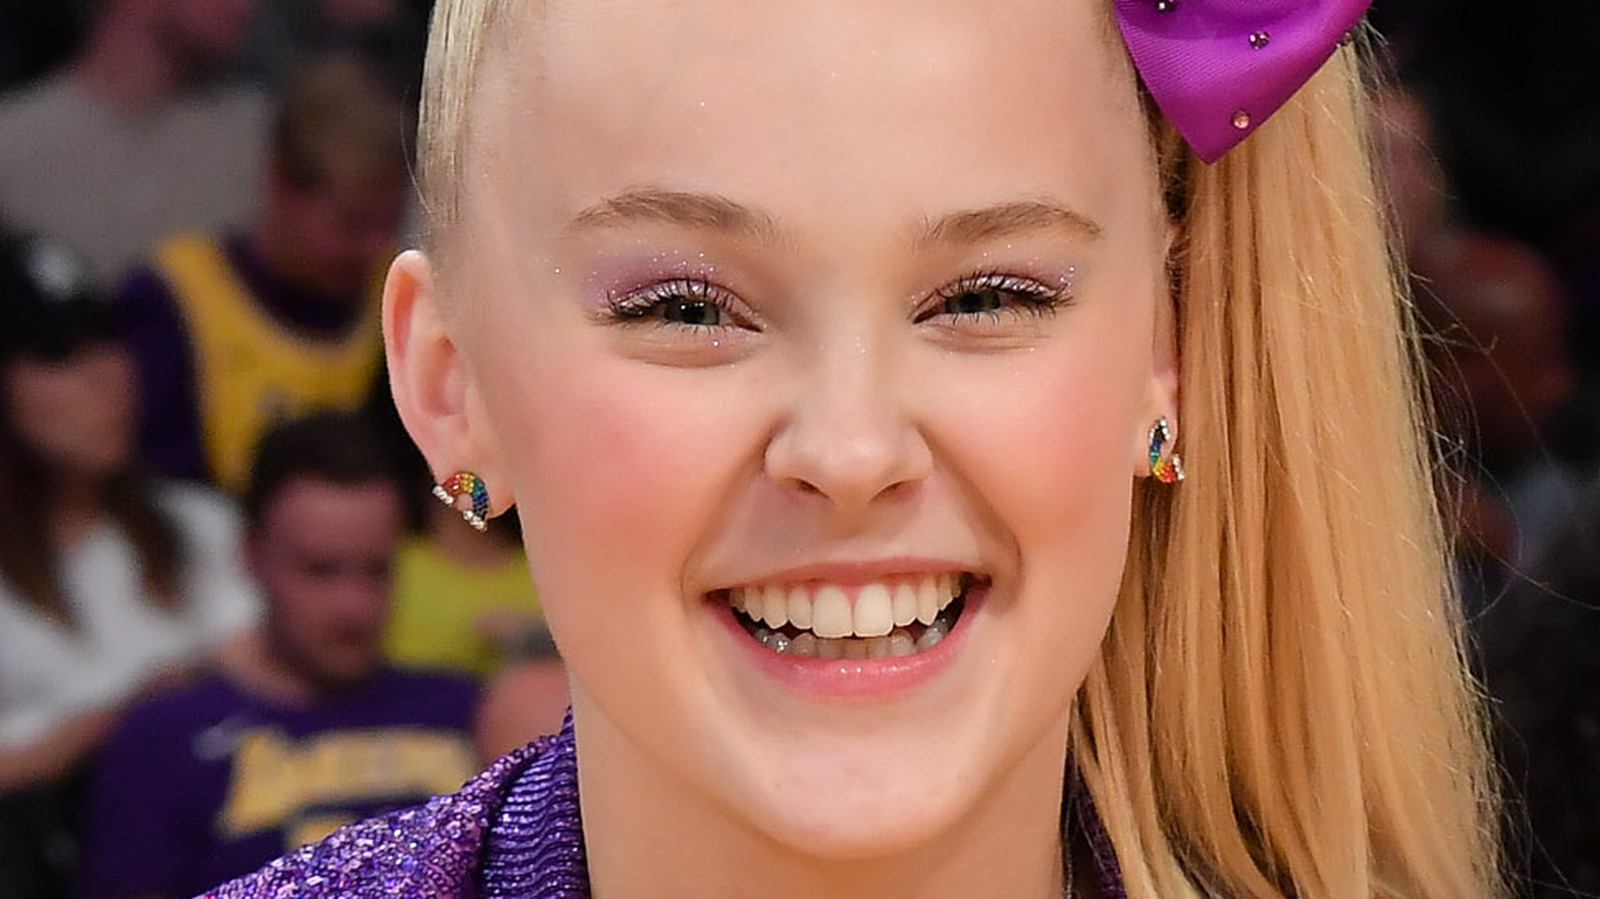 Why Jojo Siwa Wants This Scene Removed From Her Upcoming Film